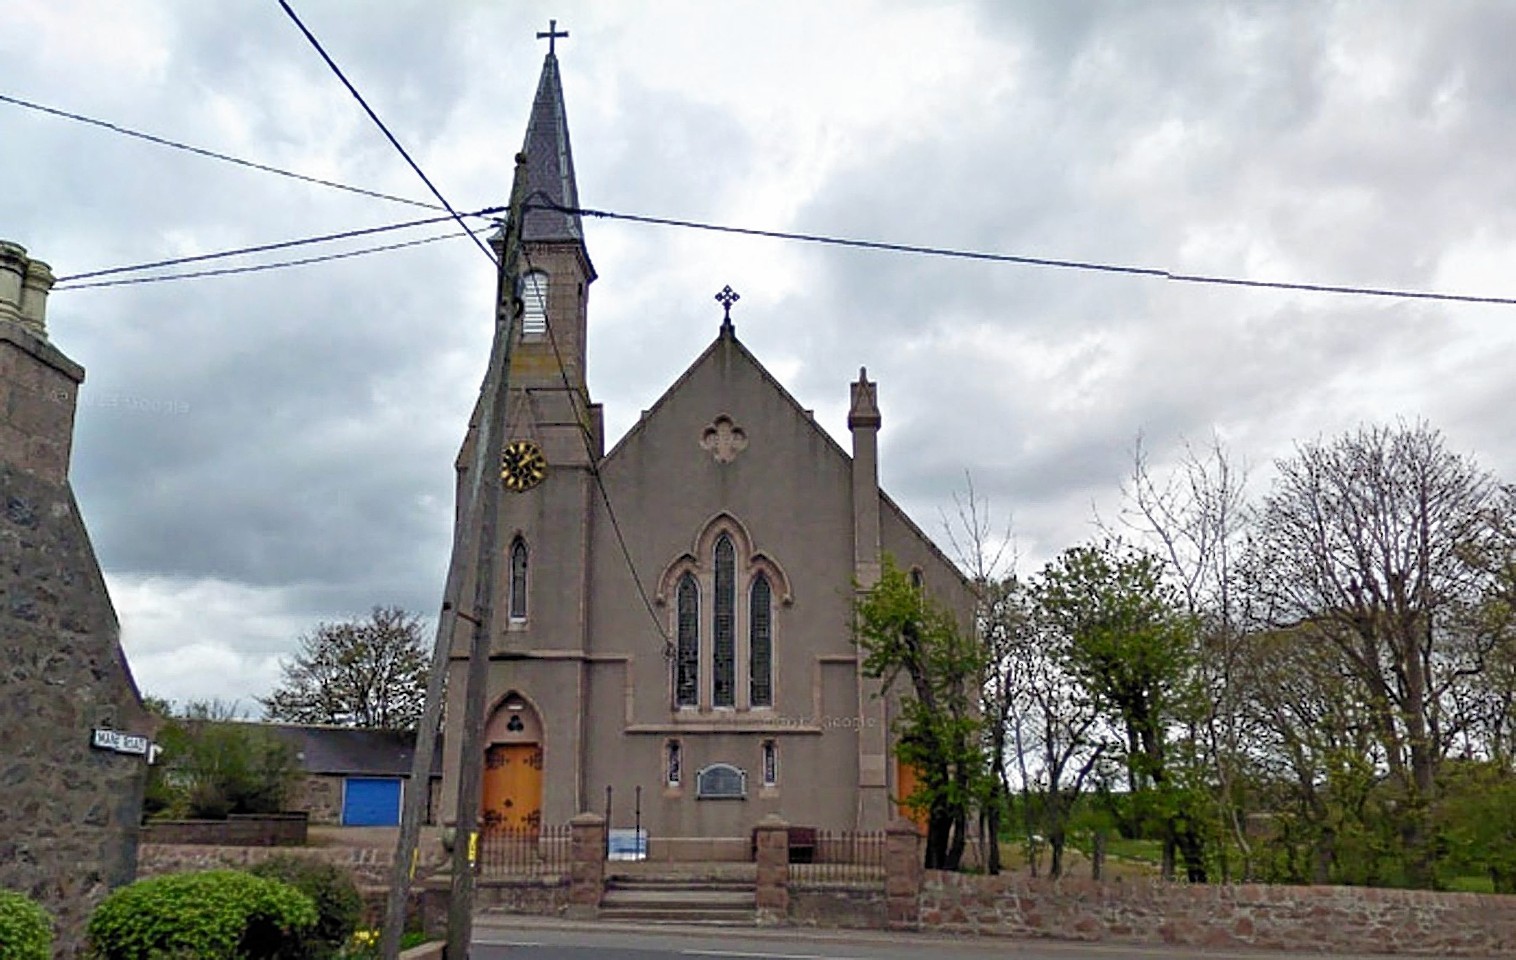 View from google showing The West Church in Hatton, Aberdeenshire. A fire at the disused West Church on Main Street in Hatton, Abderdeenshire. 35 fire fighters attended the blaze that started in the early morning. 